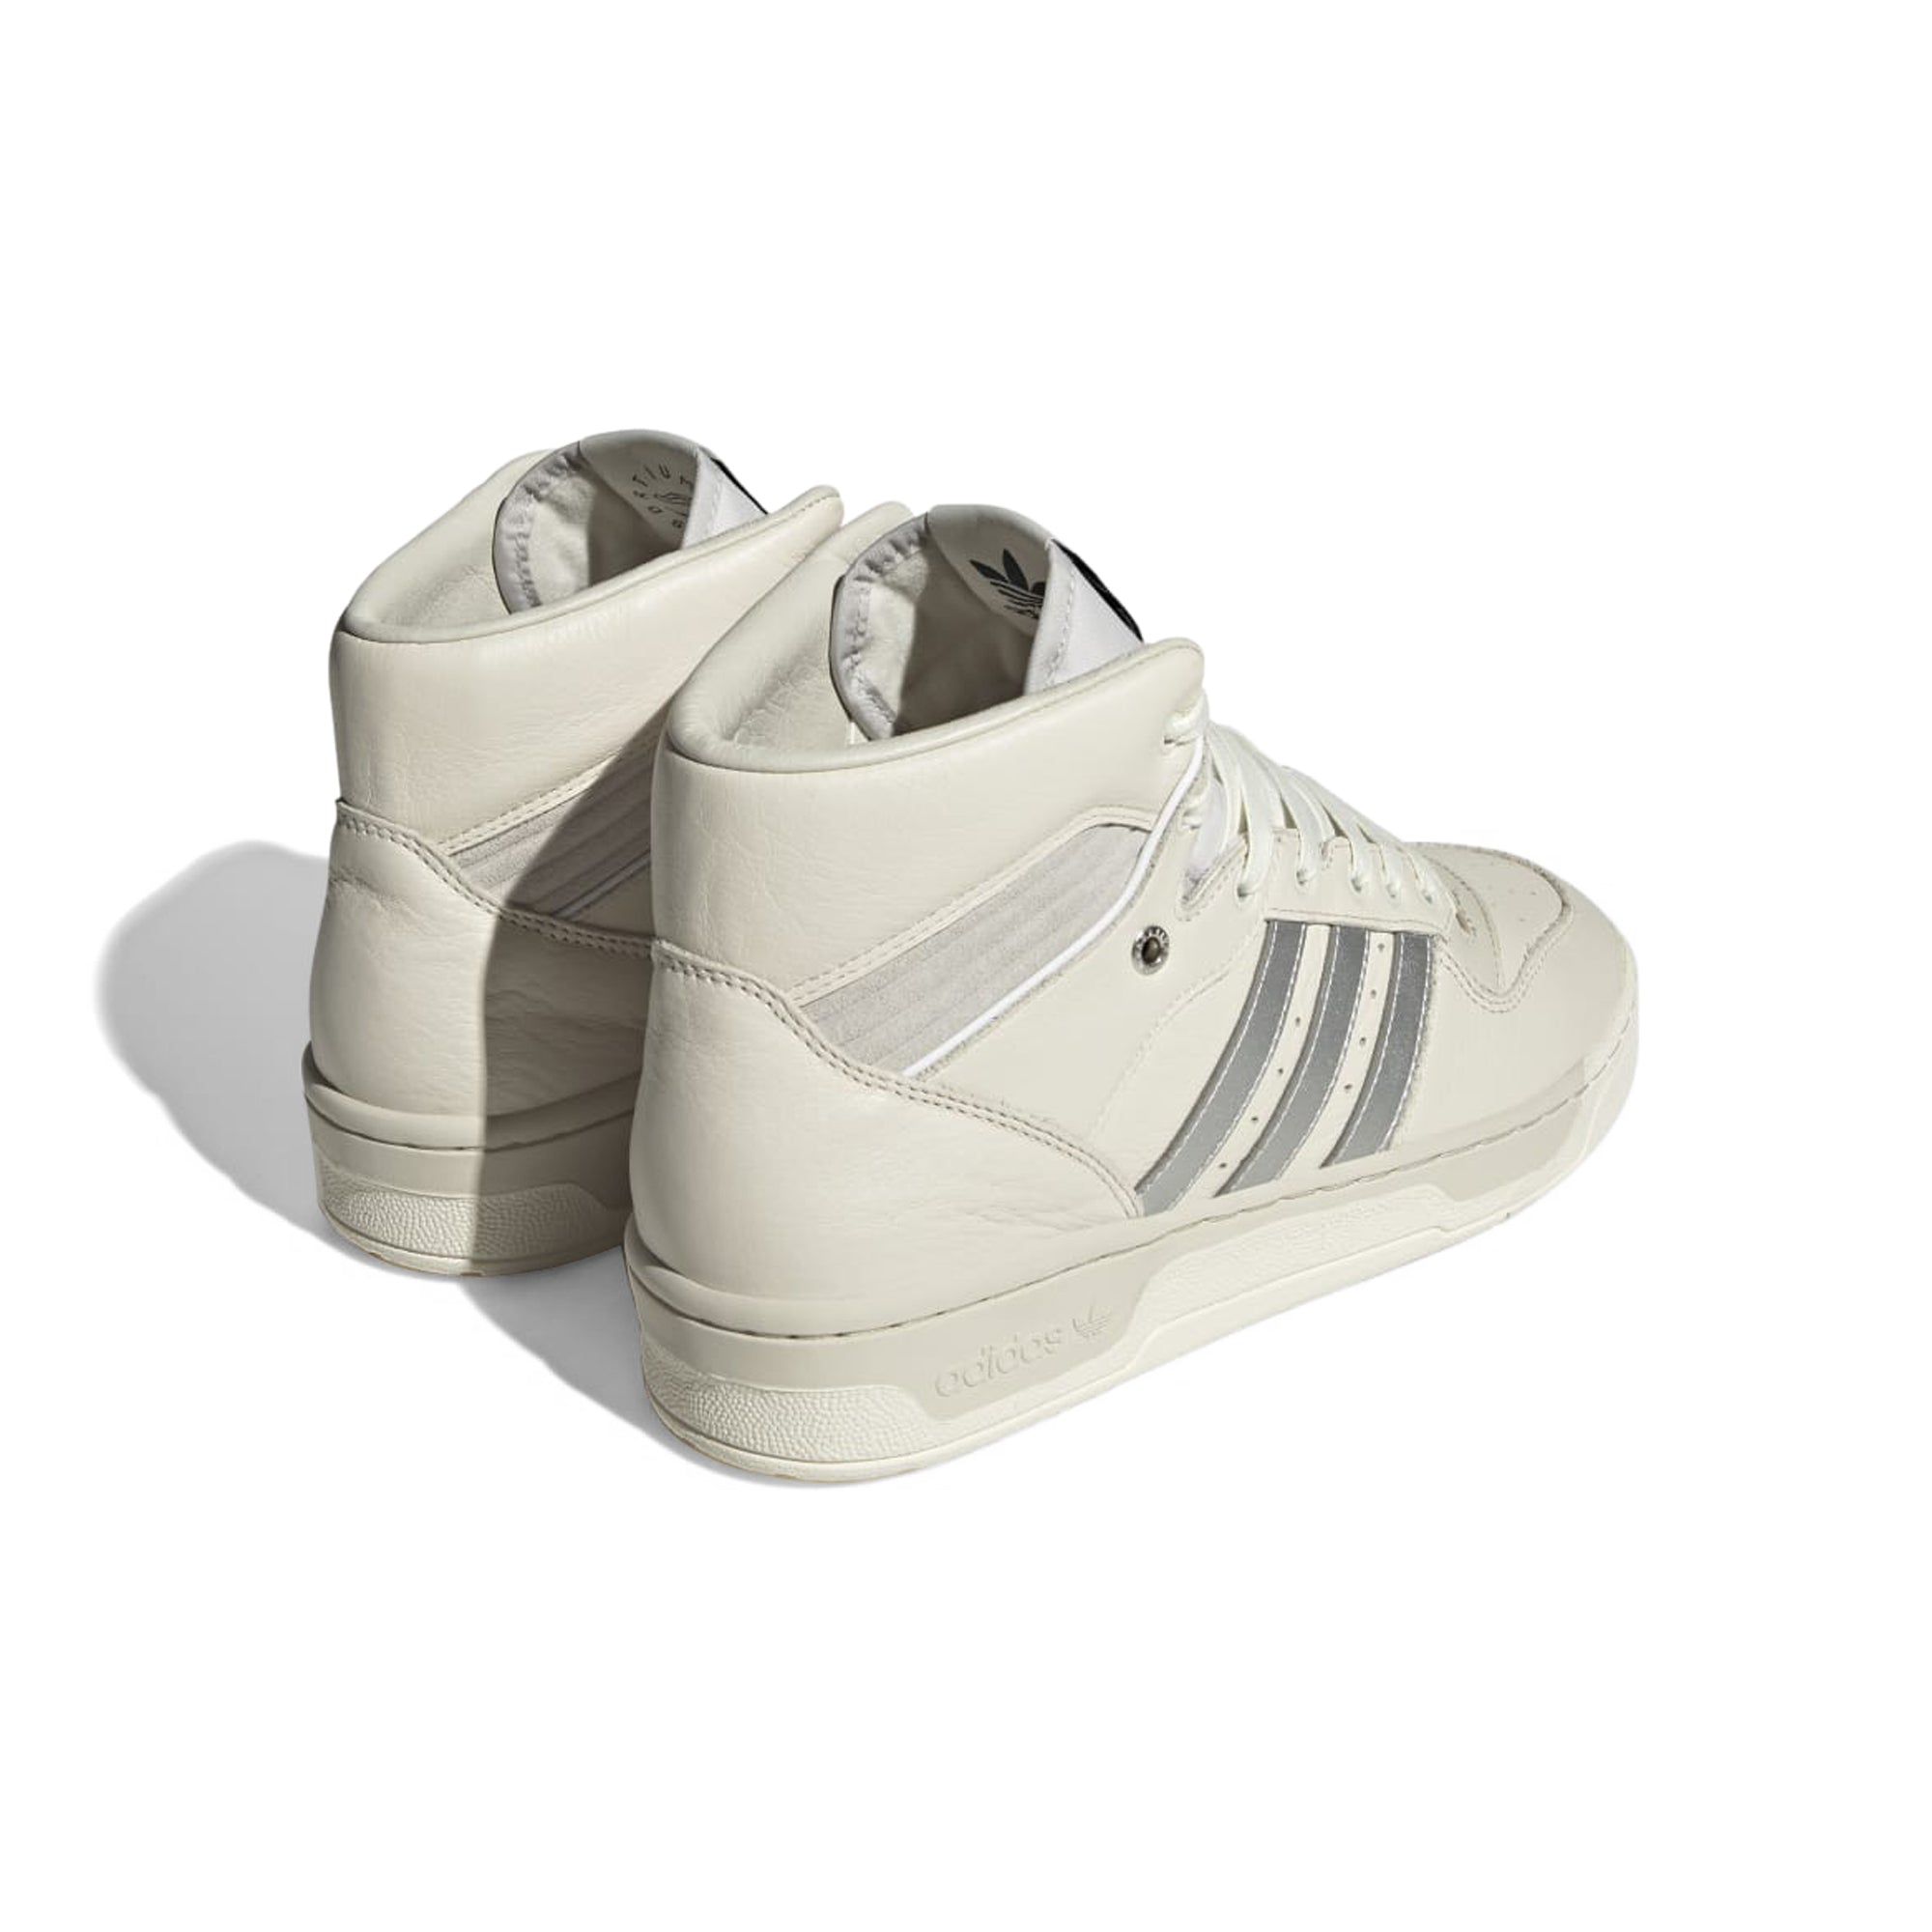 Adidas Rivalry Hi Consortium Shoes – Extra Butter